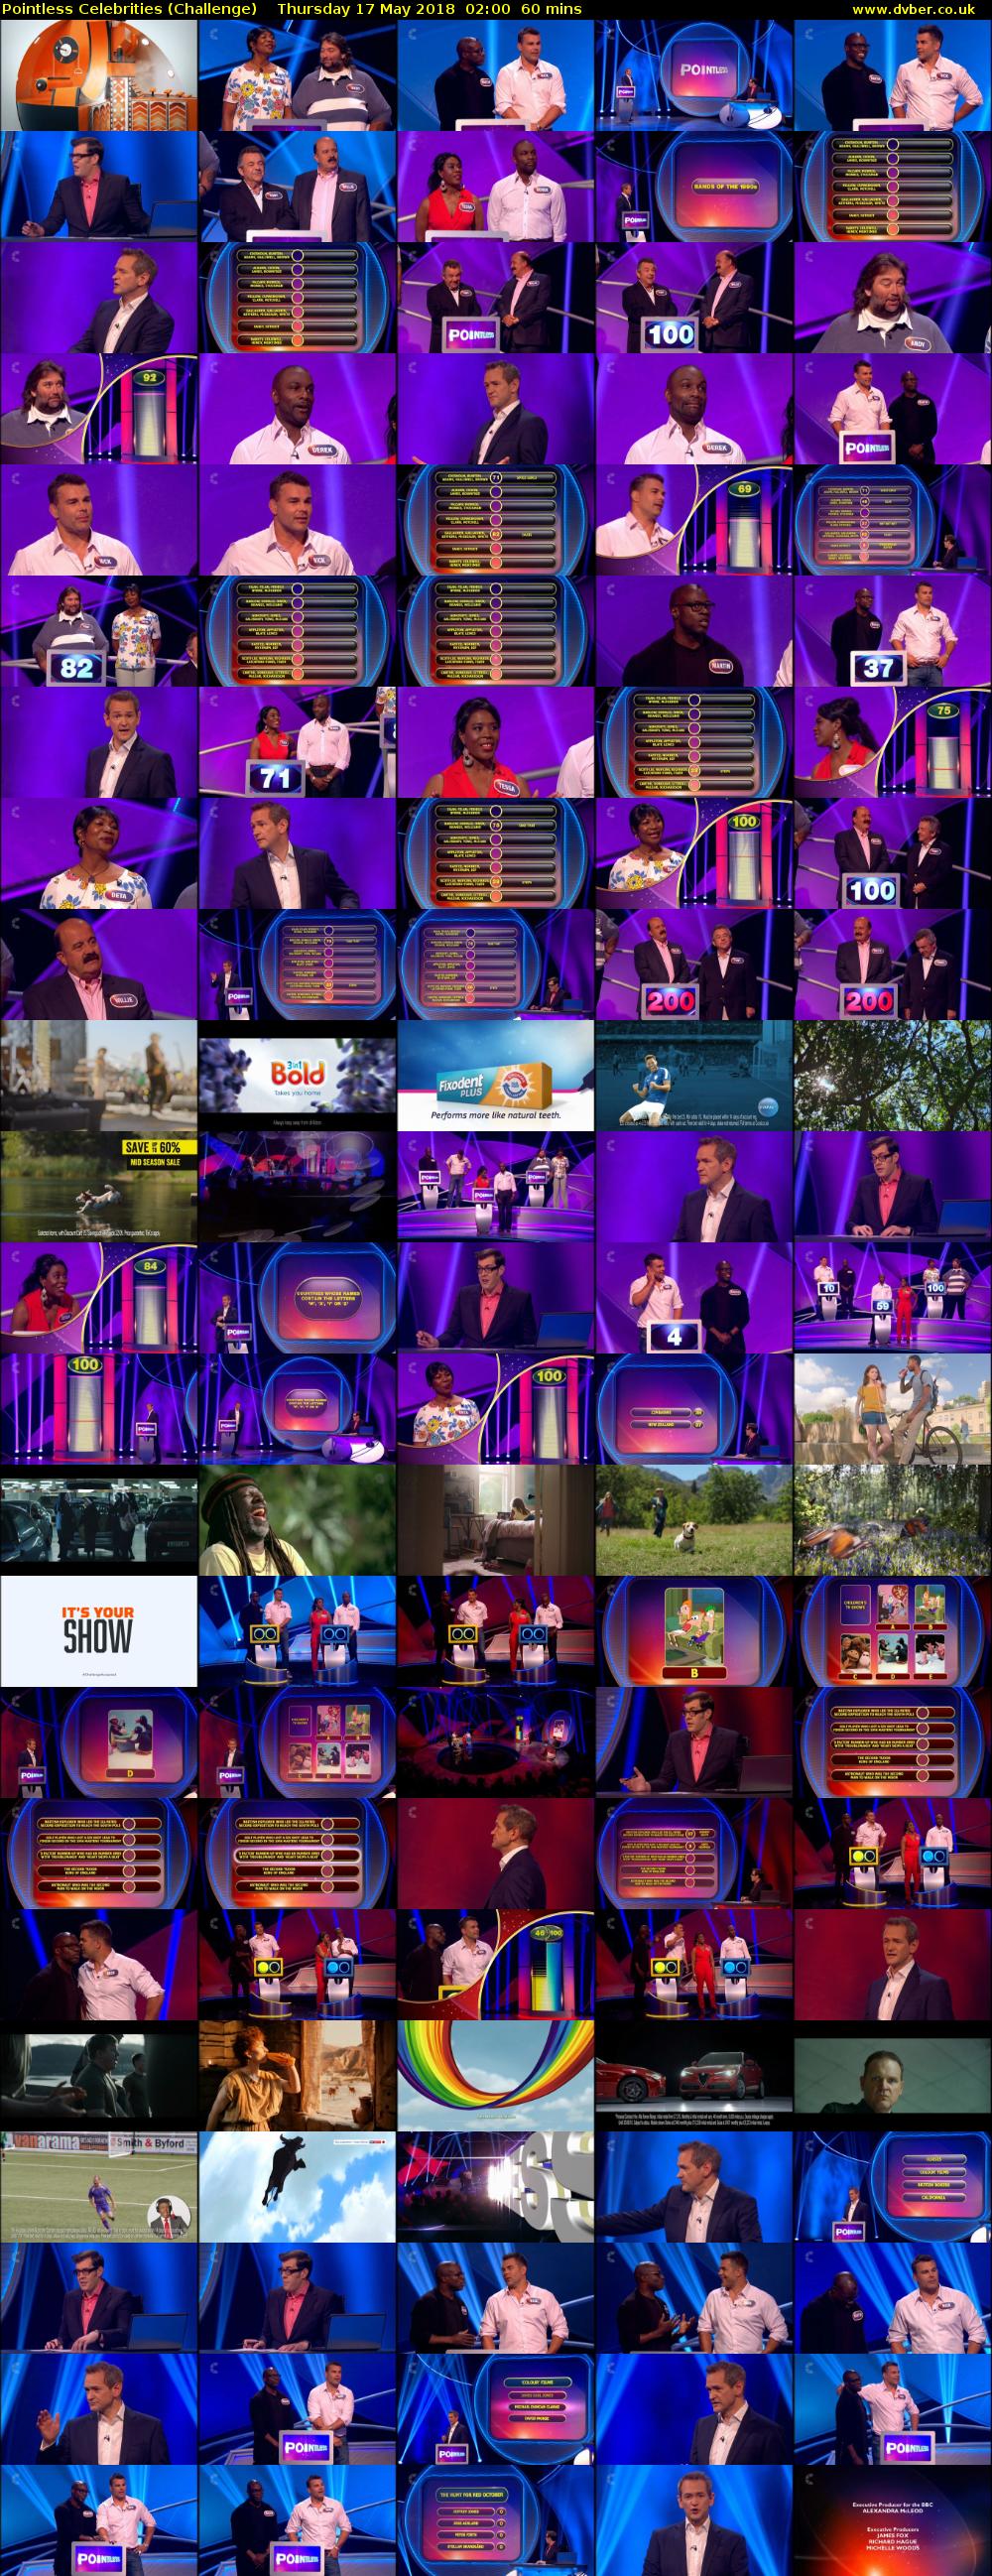 Pointless Celebrities (Challenge) Thursday 17 May 2018 02:00 - 03:00